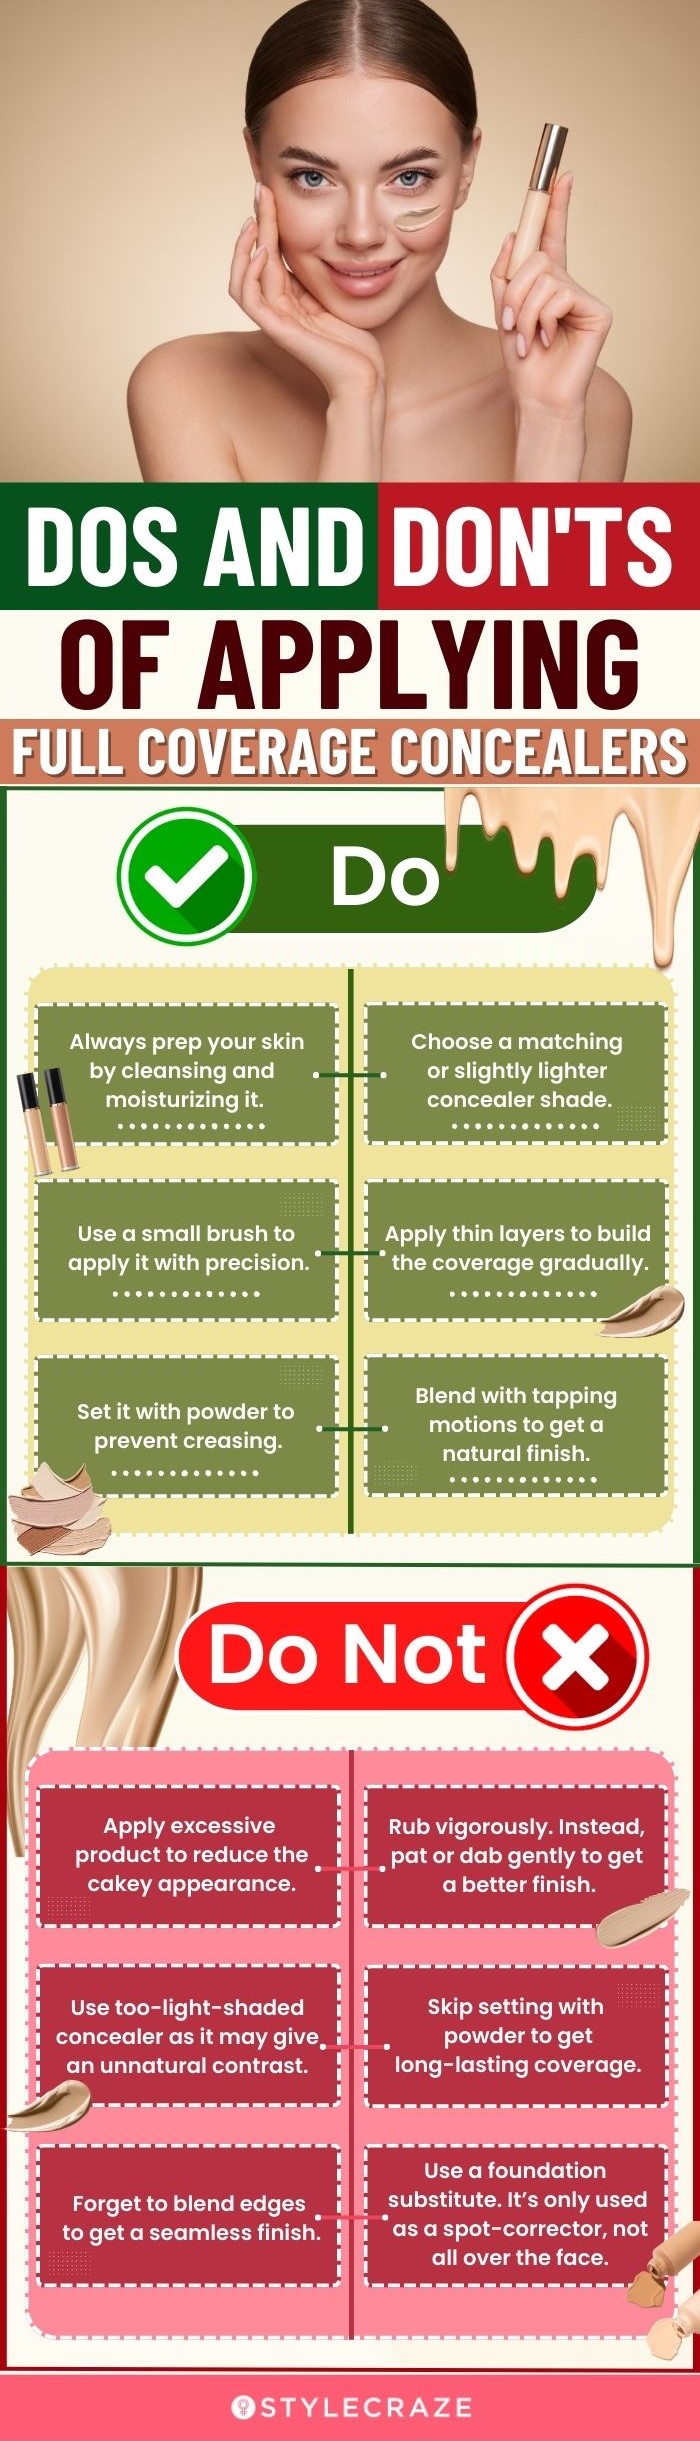 Dos And Don’ts While Applying Full Coverage Concealers (infographic)